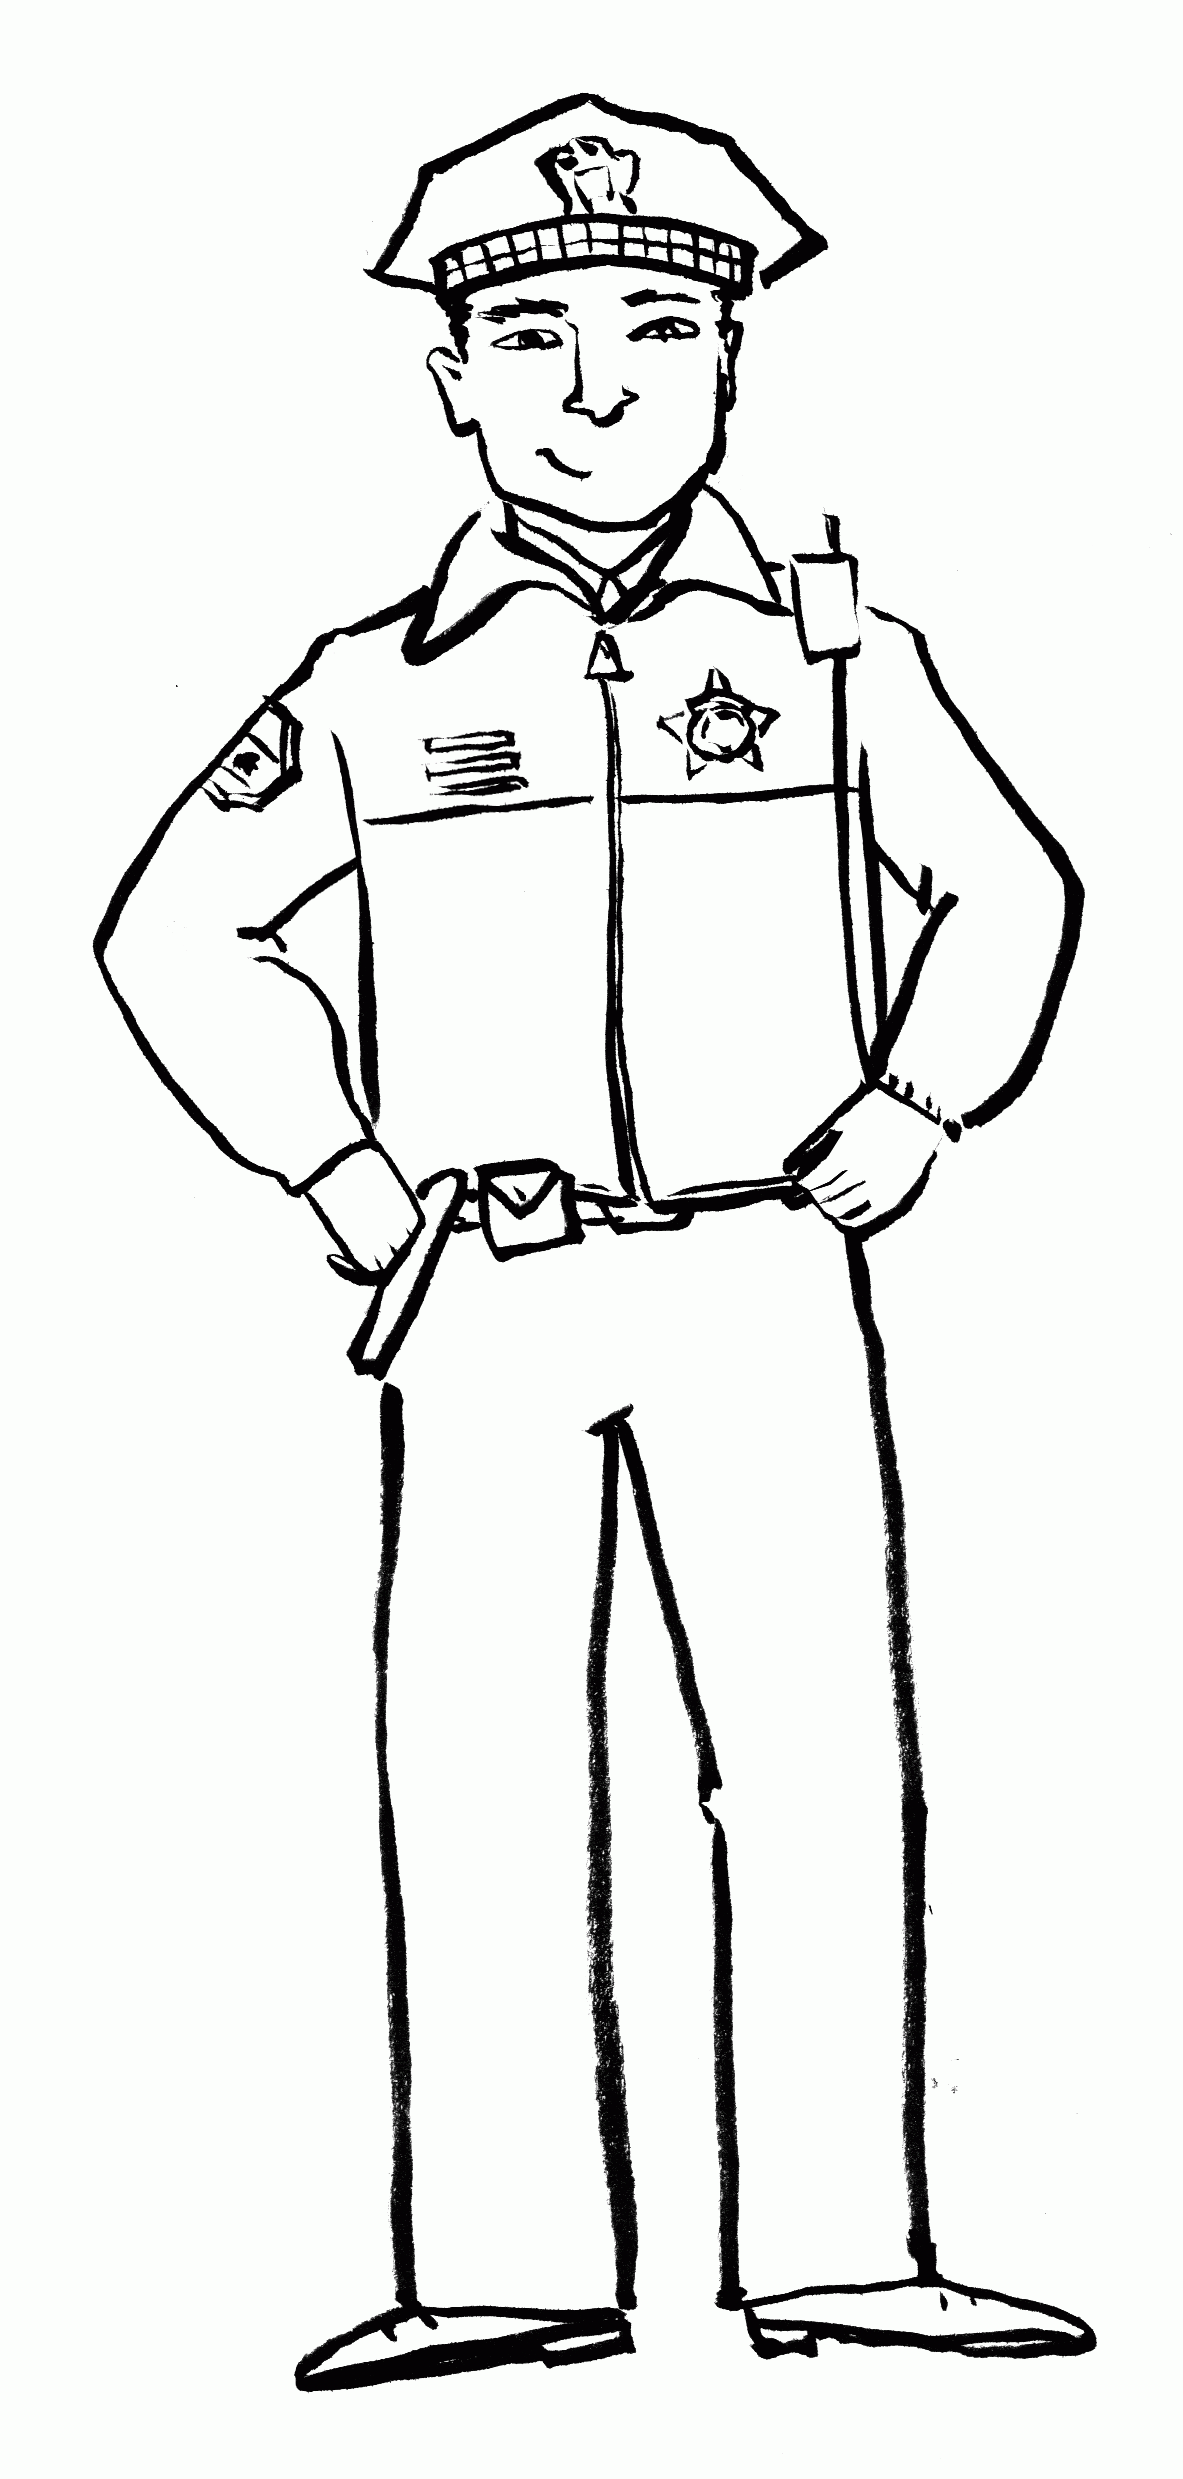 Policeman - Coloring Pages for Kids and for Adults